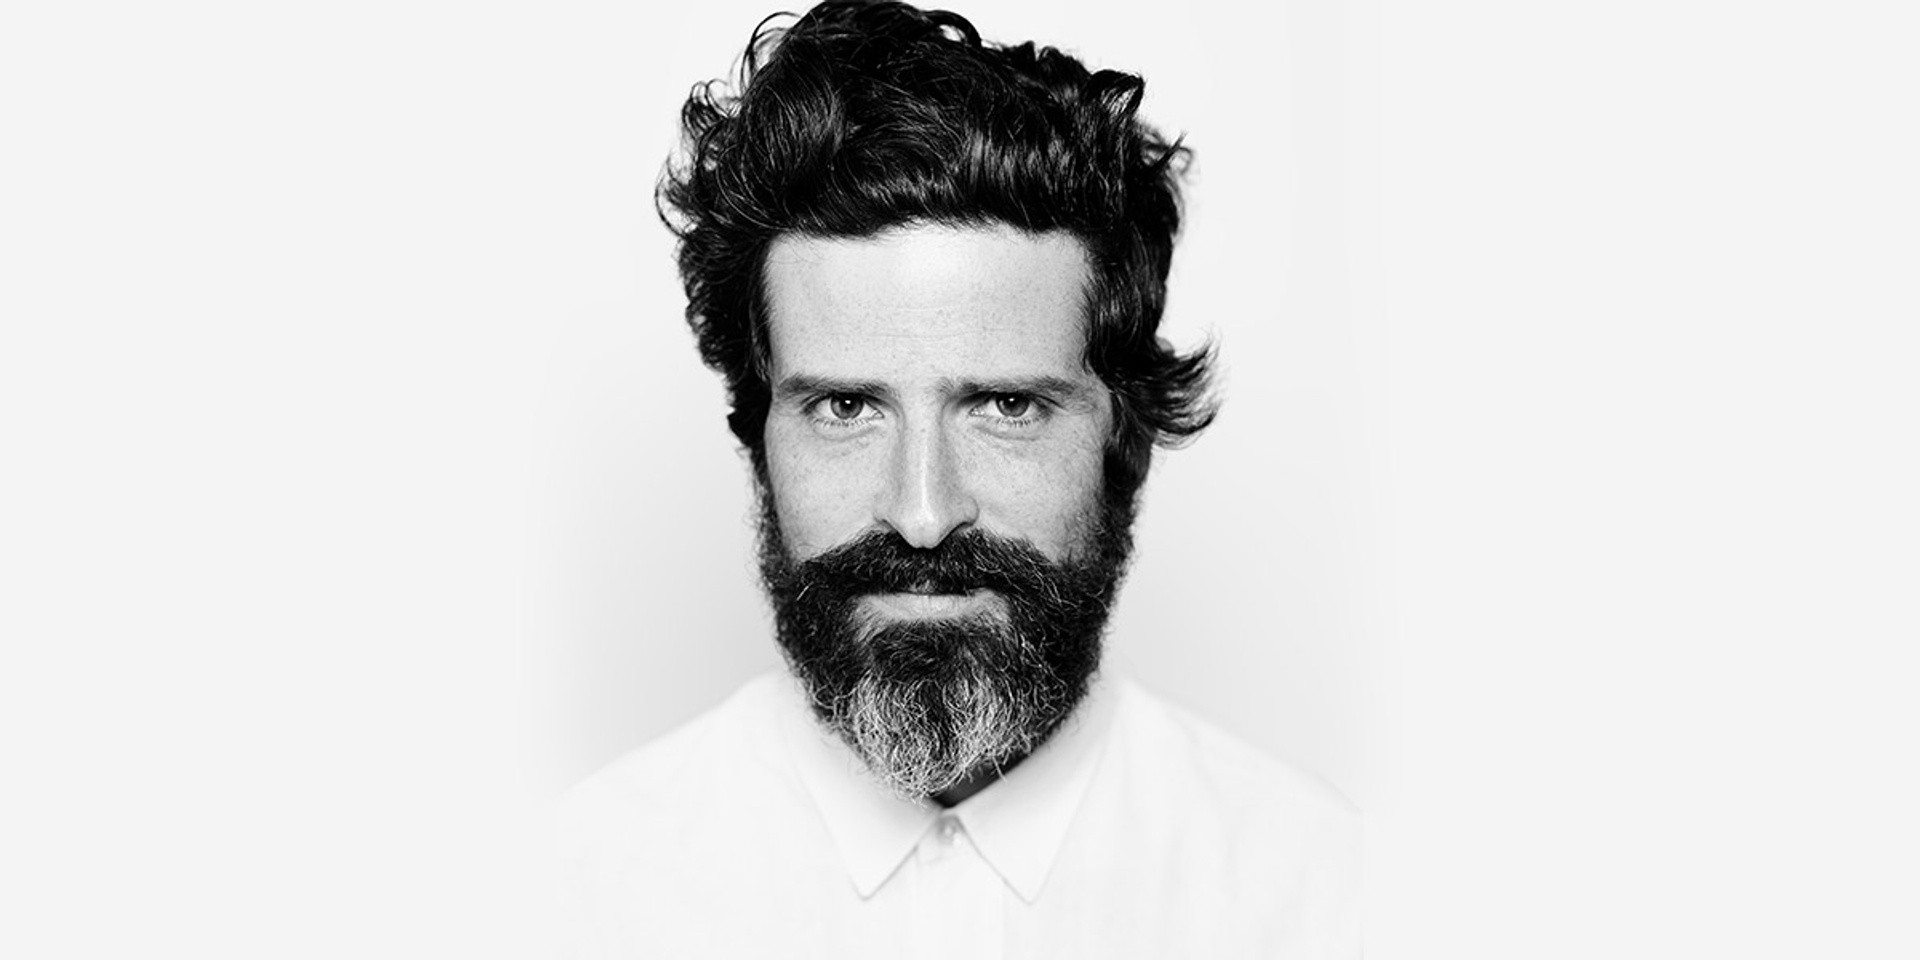 "My real job is to just go, get lost in the city or in nature, and listen": An interview with Devendra Banhart